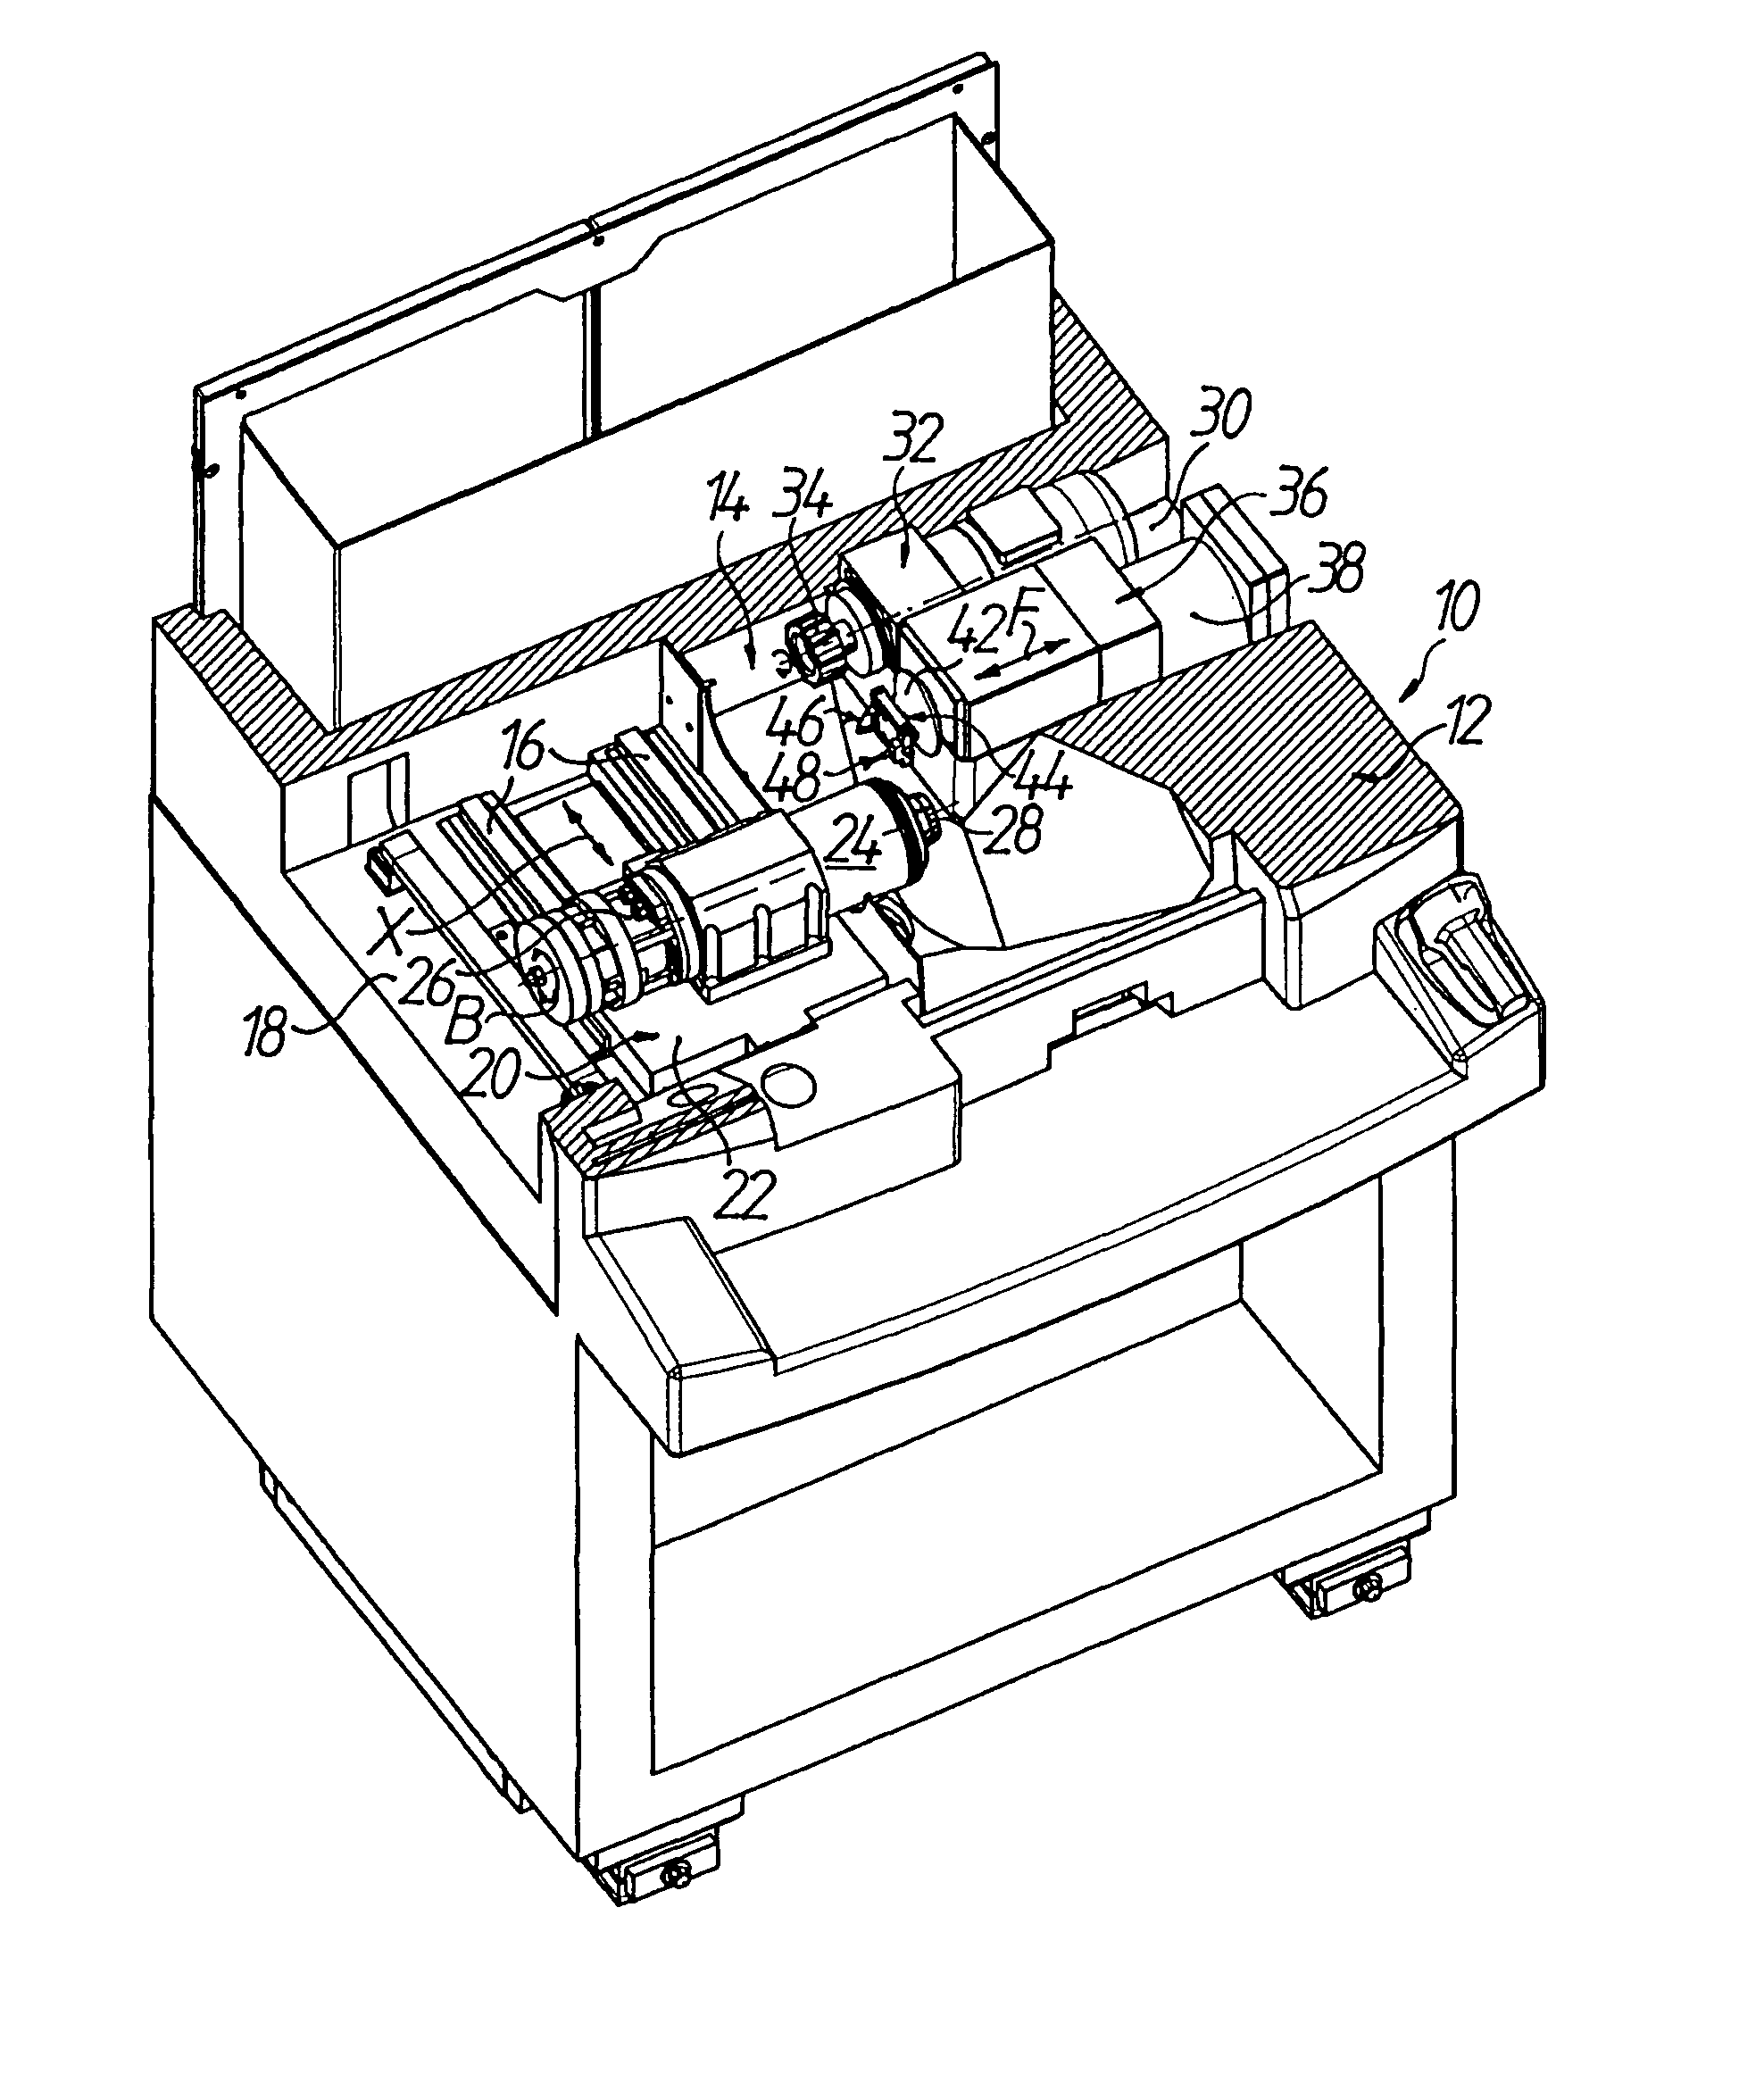 Machine for machining optical workpieces, in particular plastic spectacle lenses